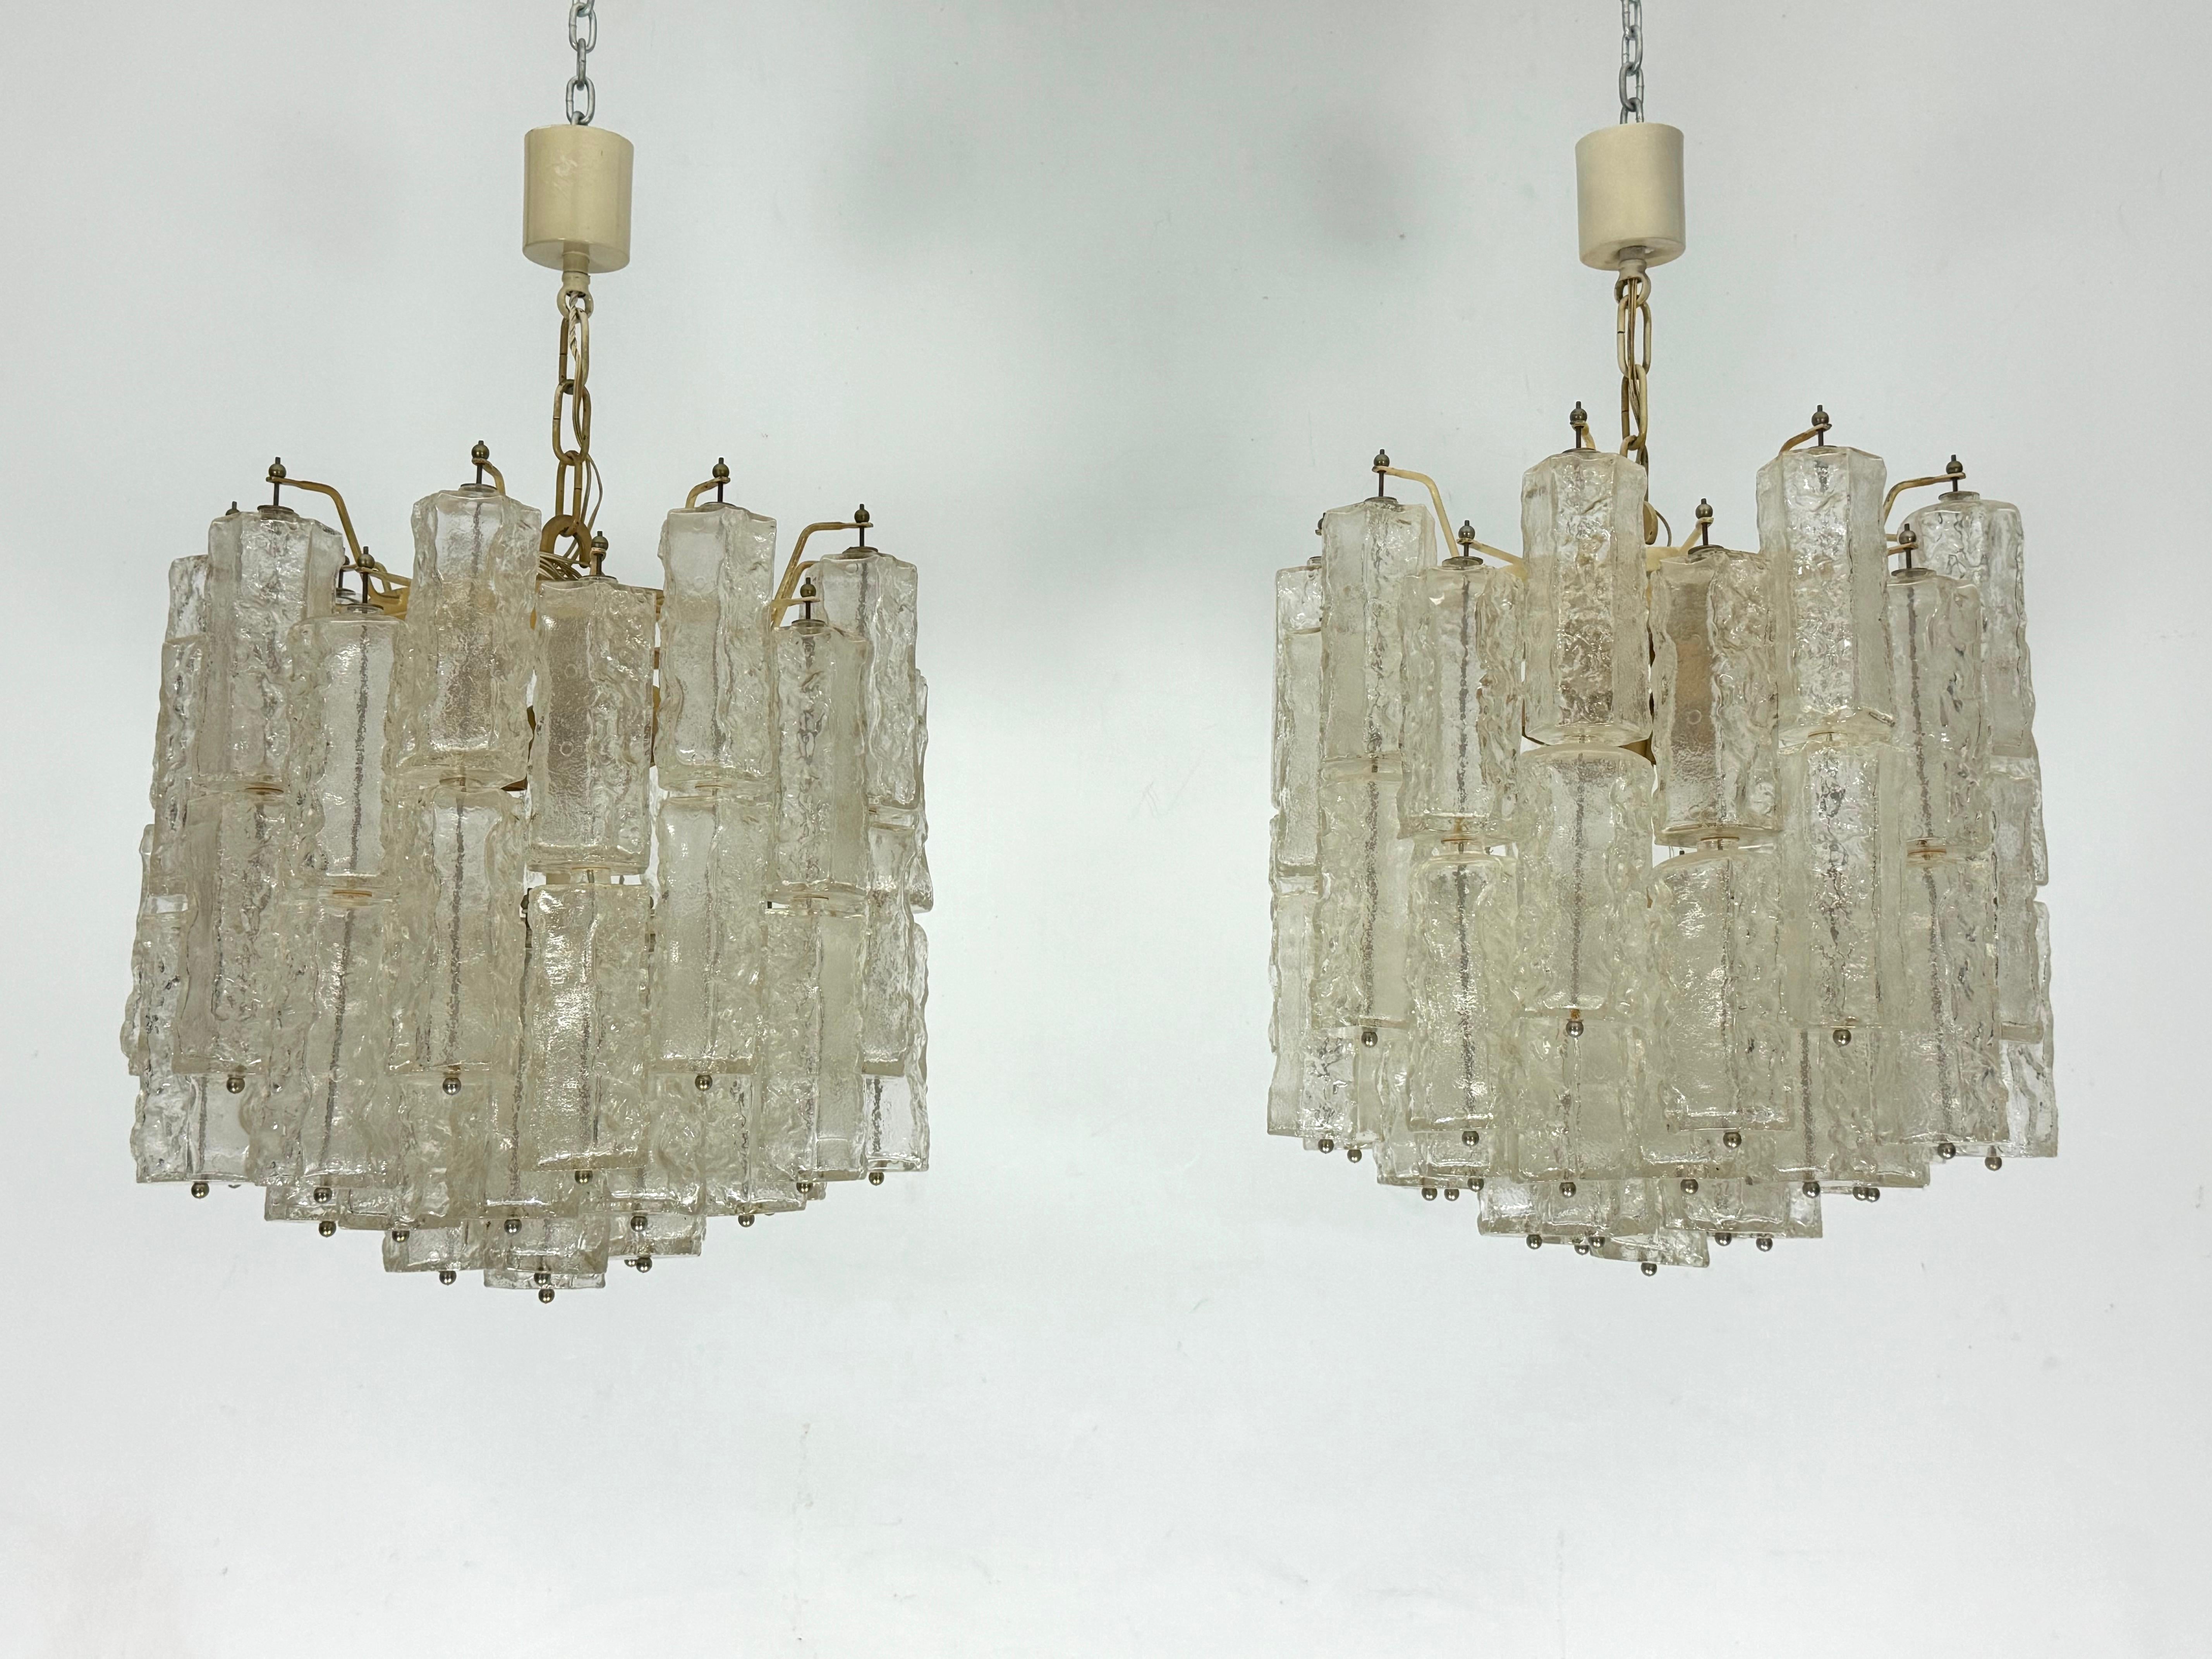 Rare Set of two Murano glass chandeliers produced by Venini during the 70s.
Good vintage condition with normal trace of age and use on the metal structure. All glasses with no cracks or chips. Full working with EU standard, adaptable on demand for